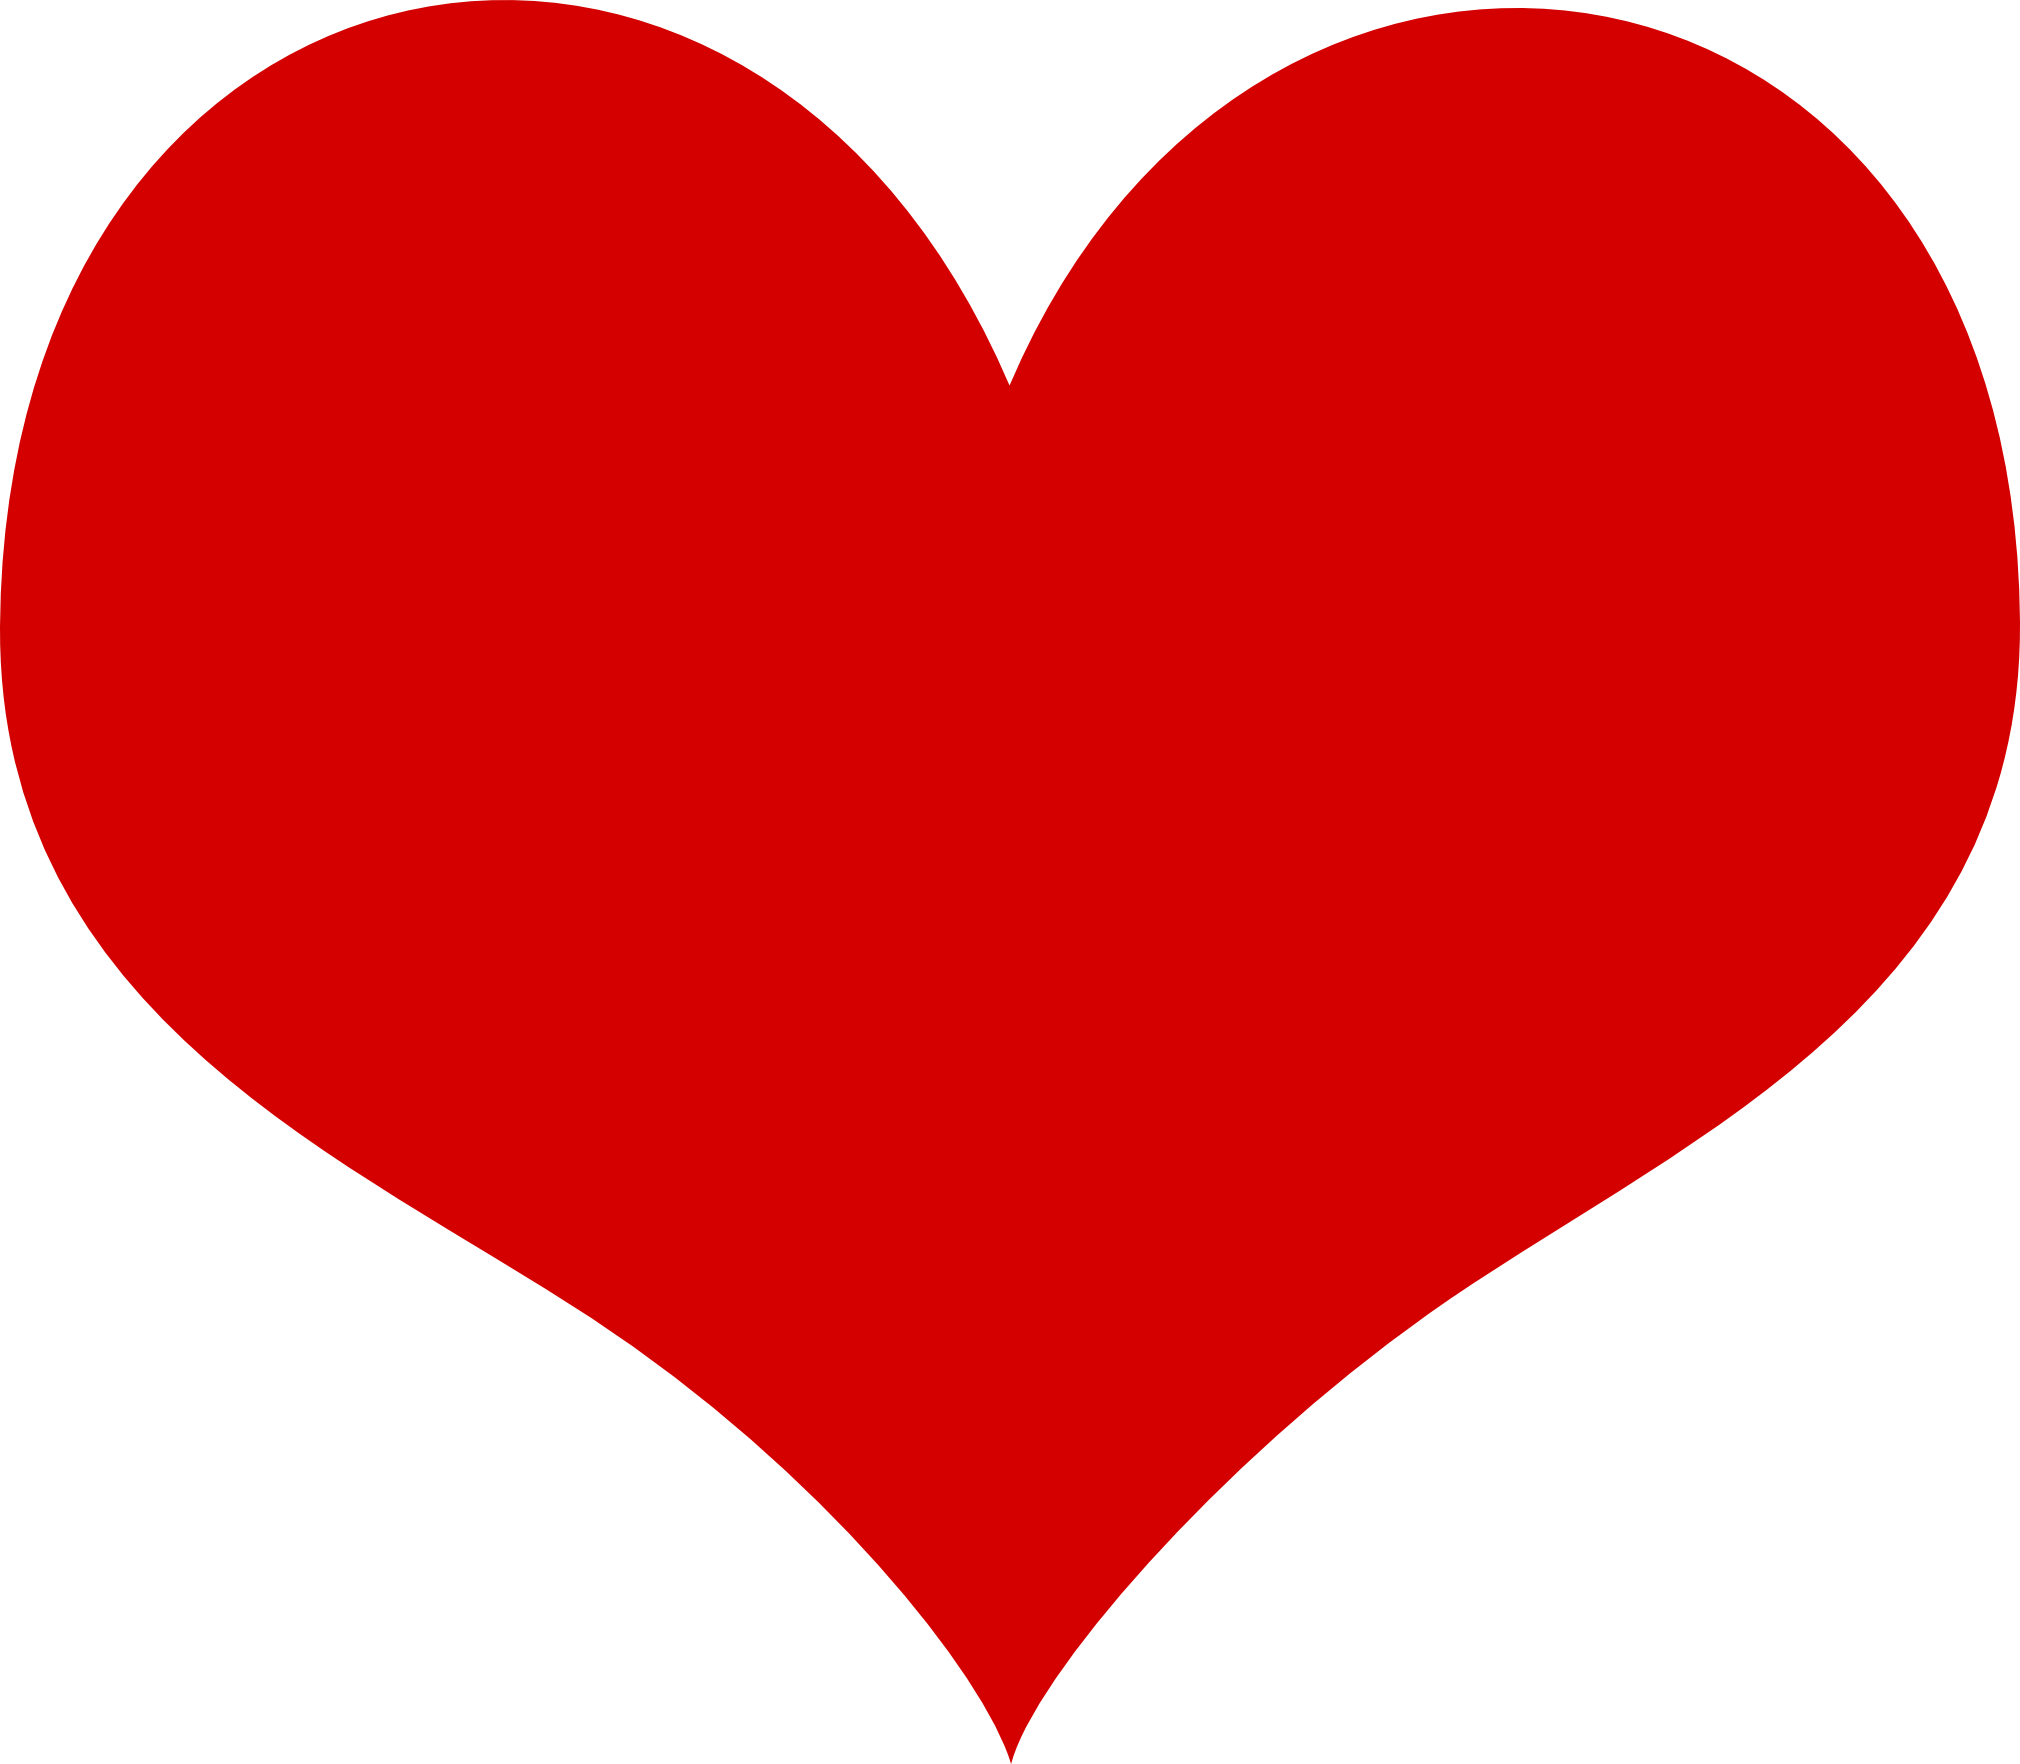 Heart Shapes Png